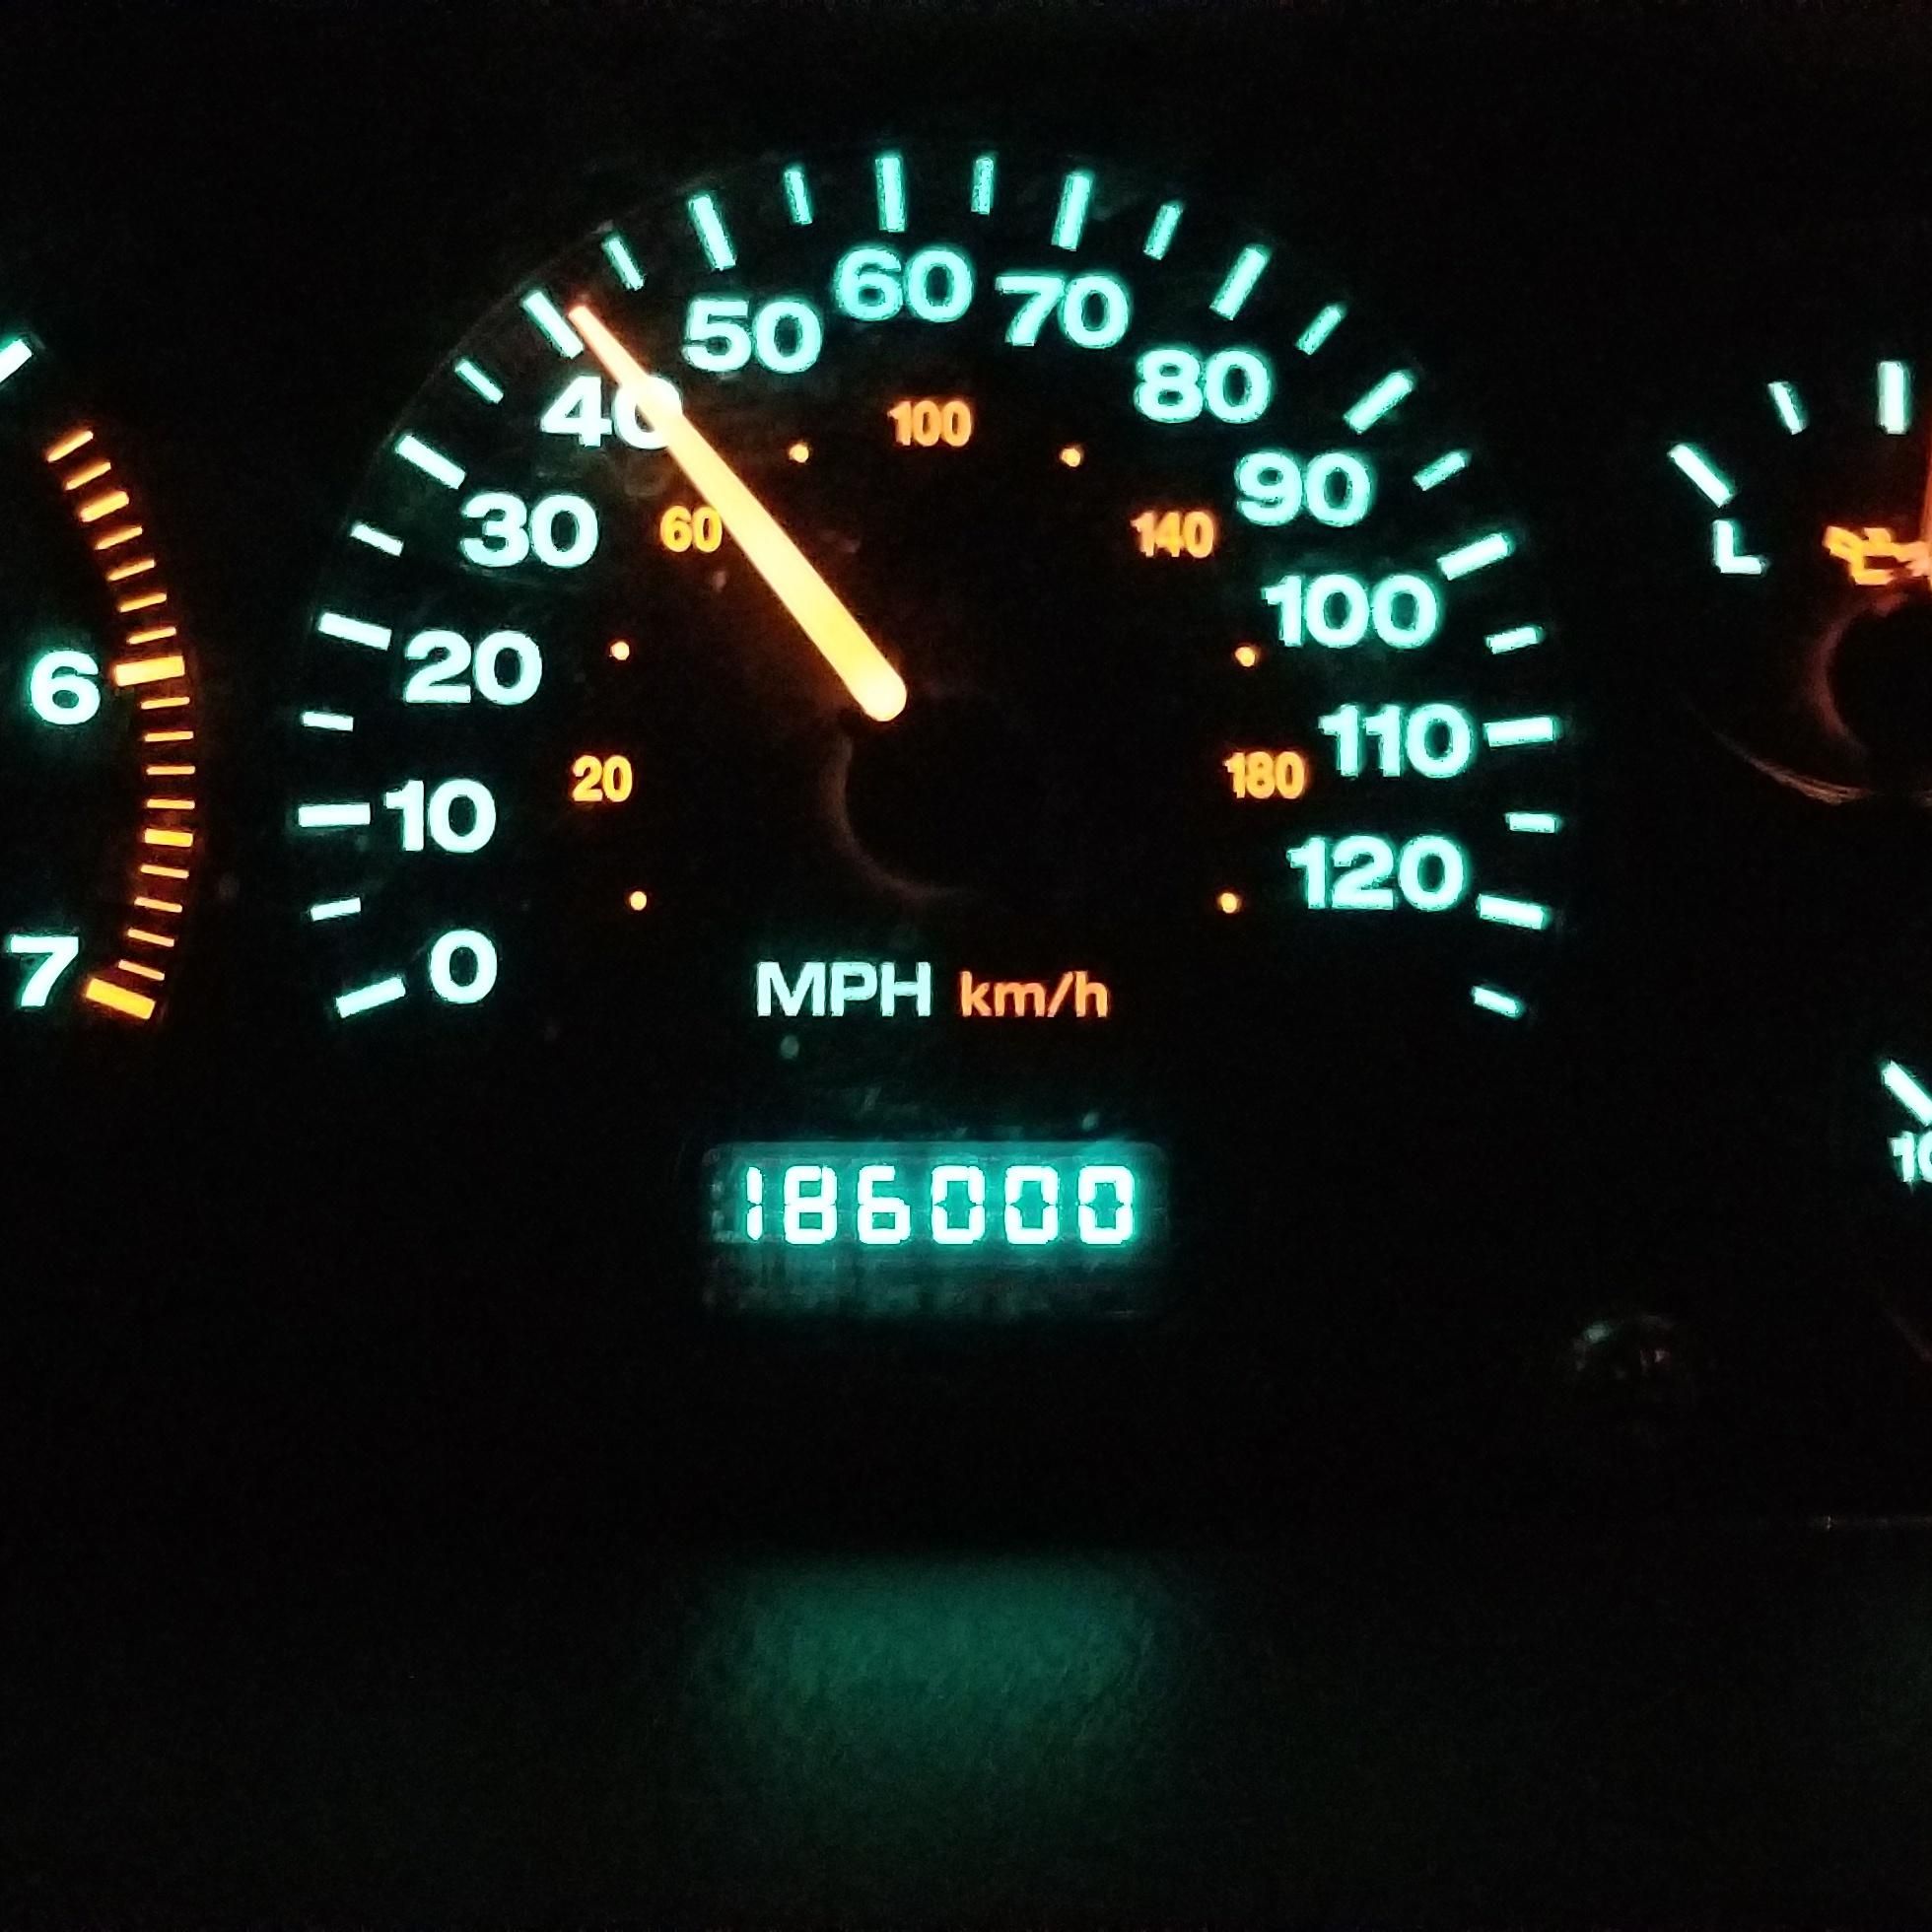 It only took 14 years for my jeep to travel the distance that light travels in one second.